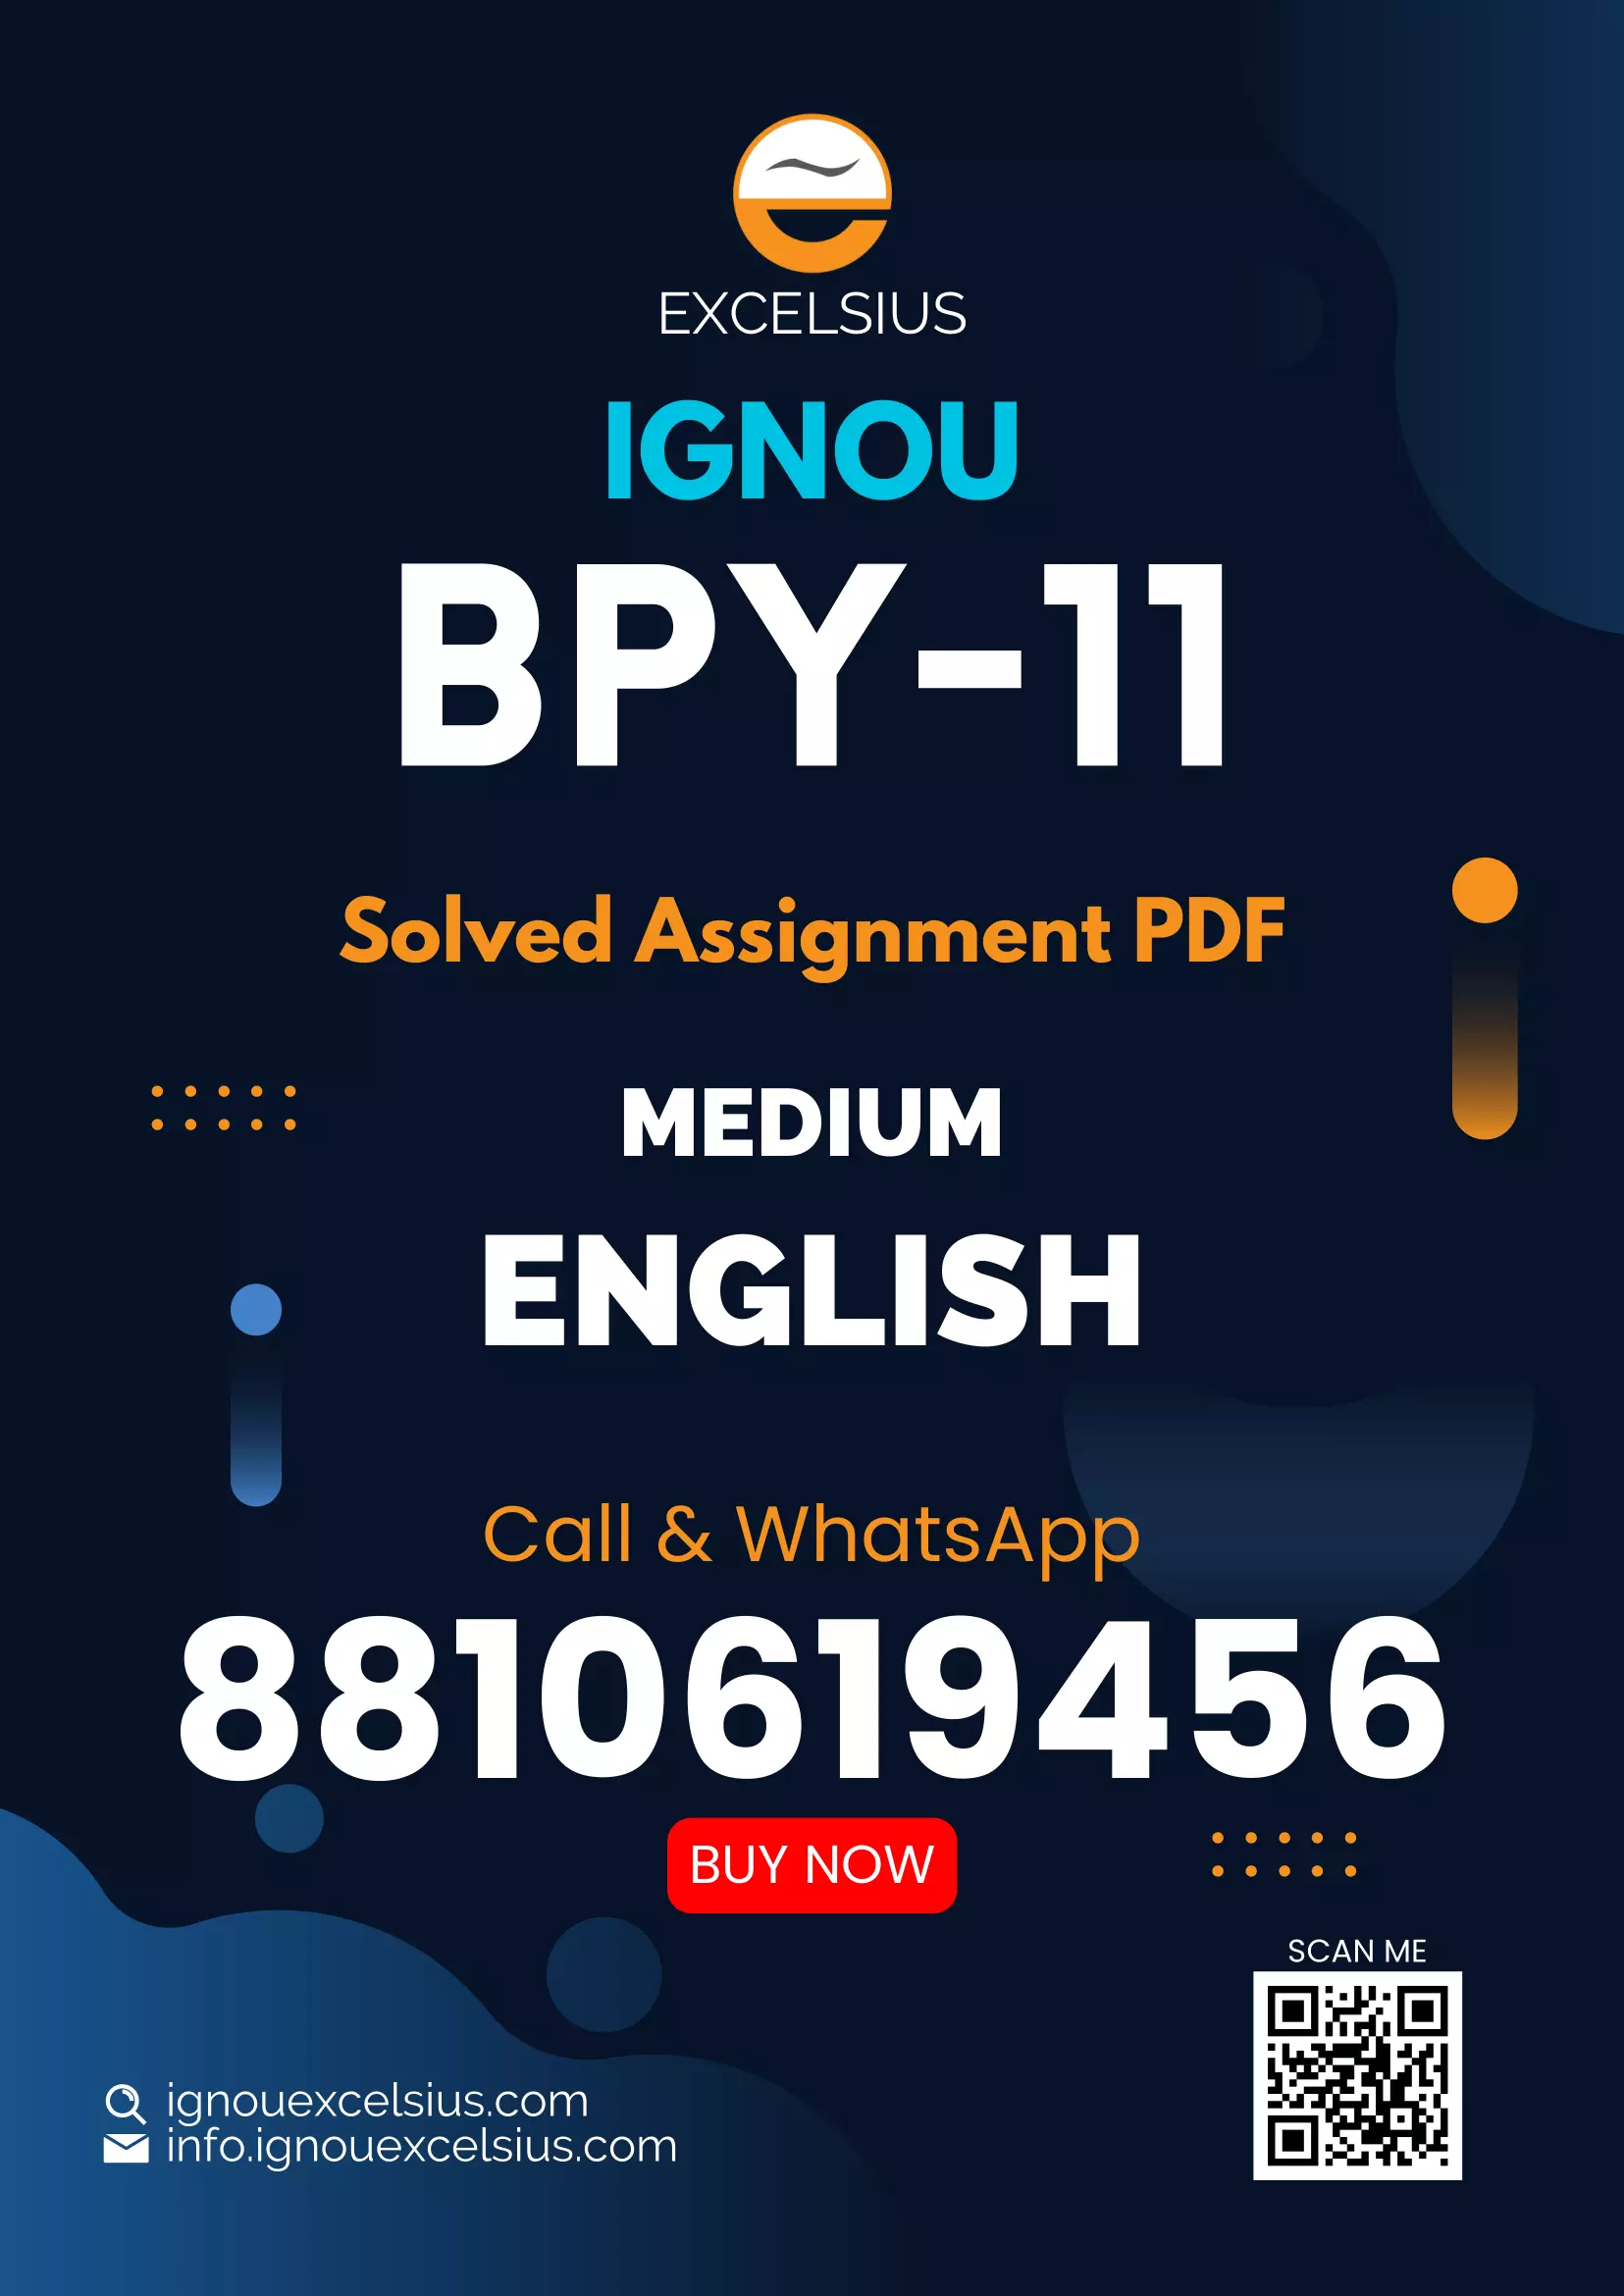 IGNOU BPY-11 - Philosophy of Human Persons, Latest Solved Assignment-December 2022 - June 2023